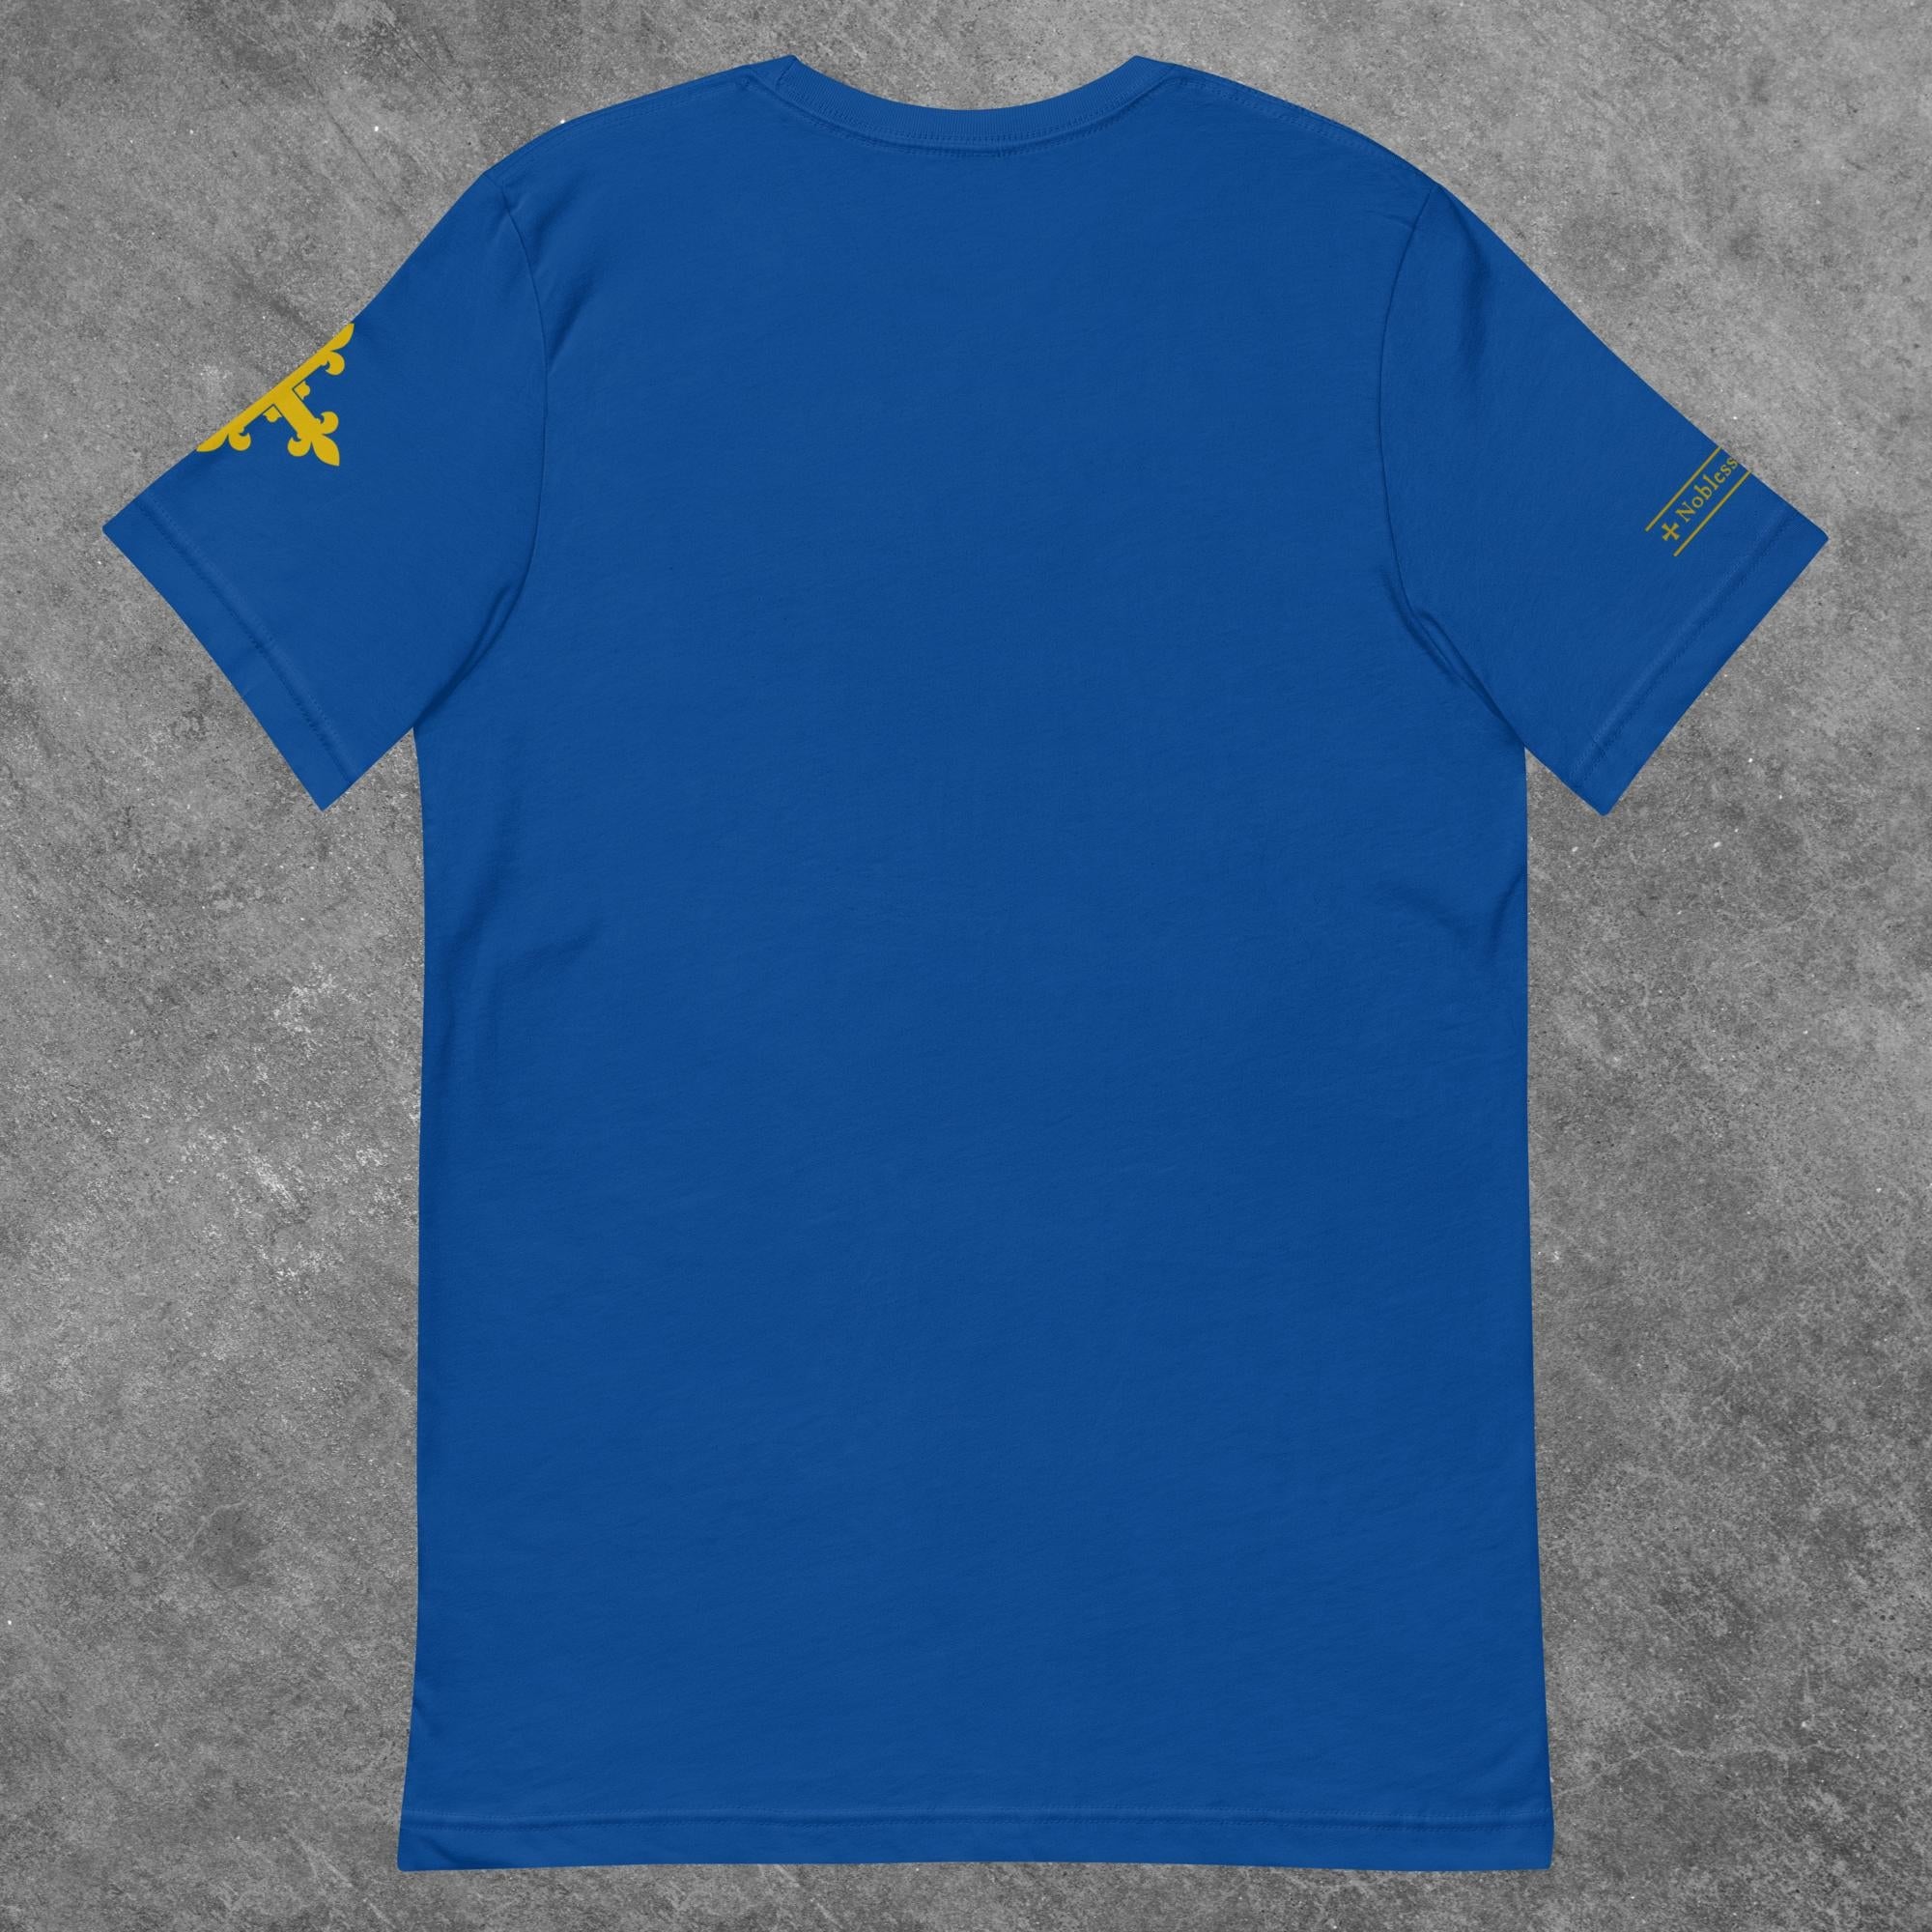 The Arms of France T-shirt - Noblesse Oblige Apparel